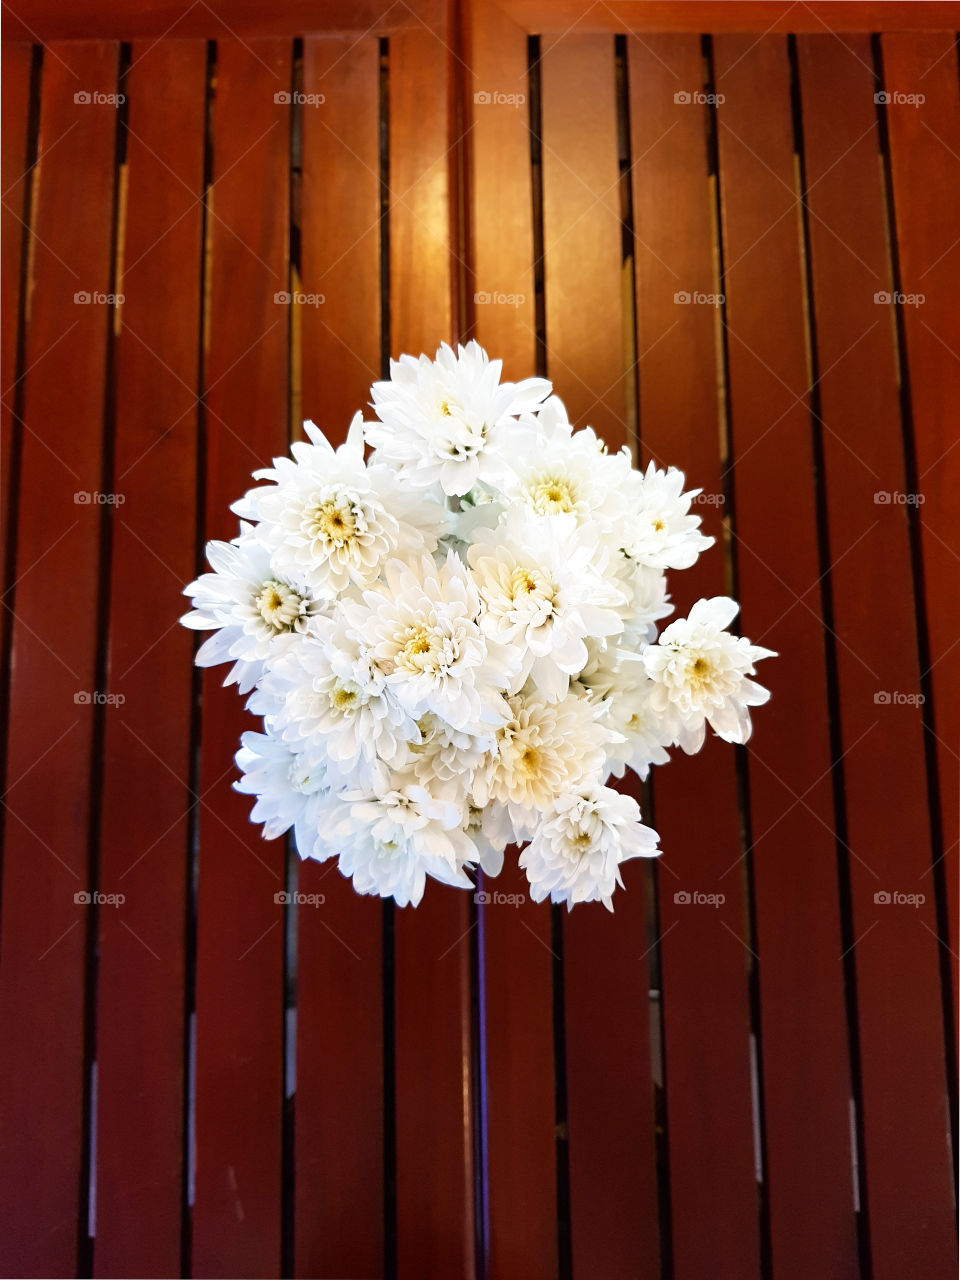 White fresh flower in a glass vase.It was put on wooden table for decoration.